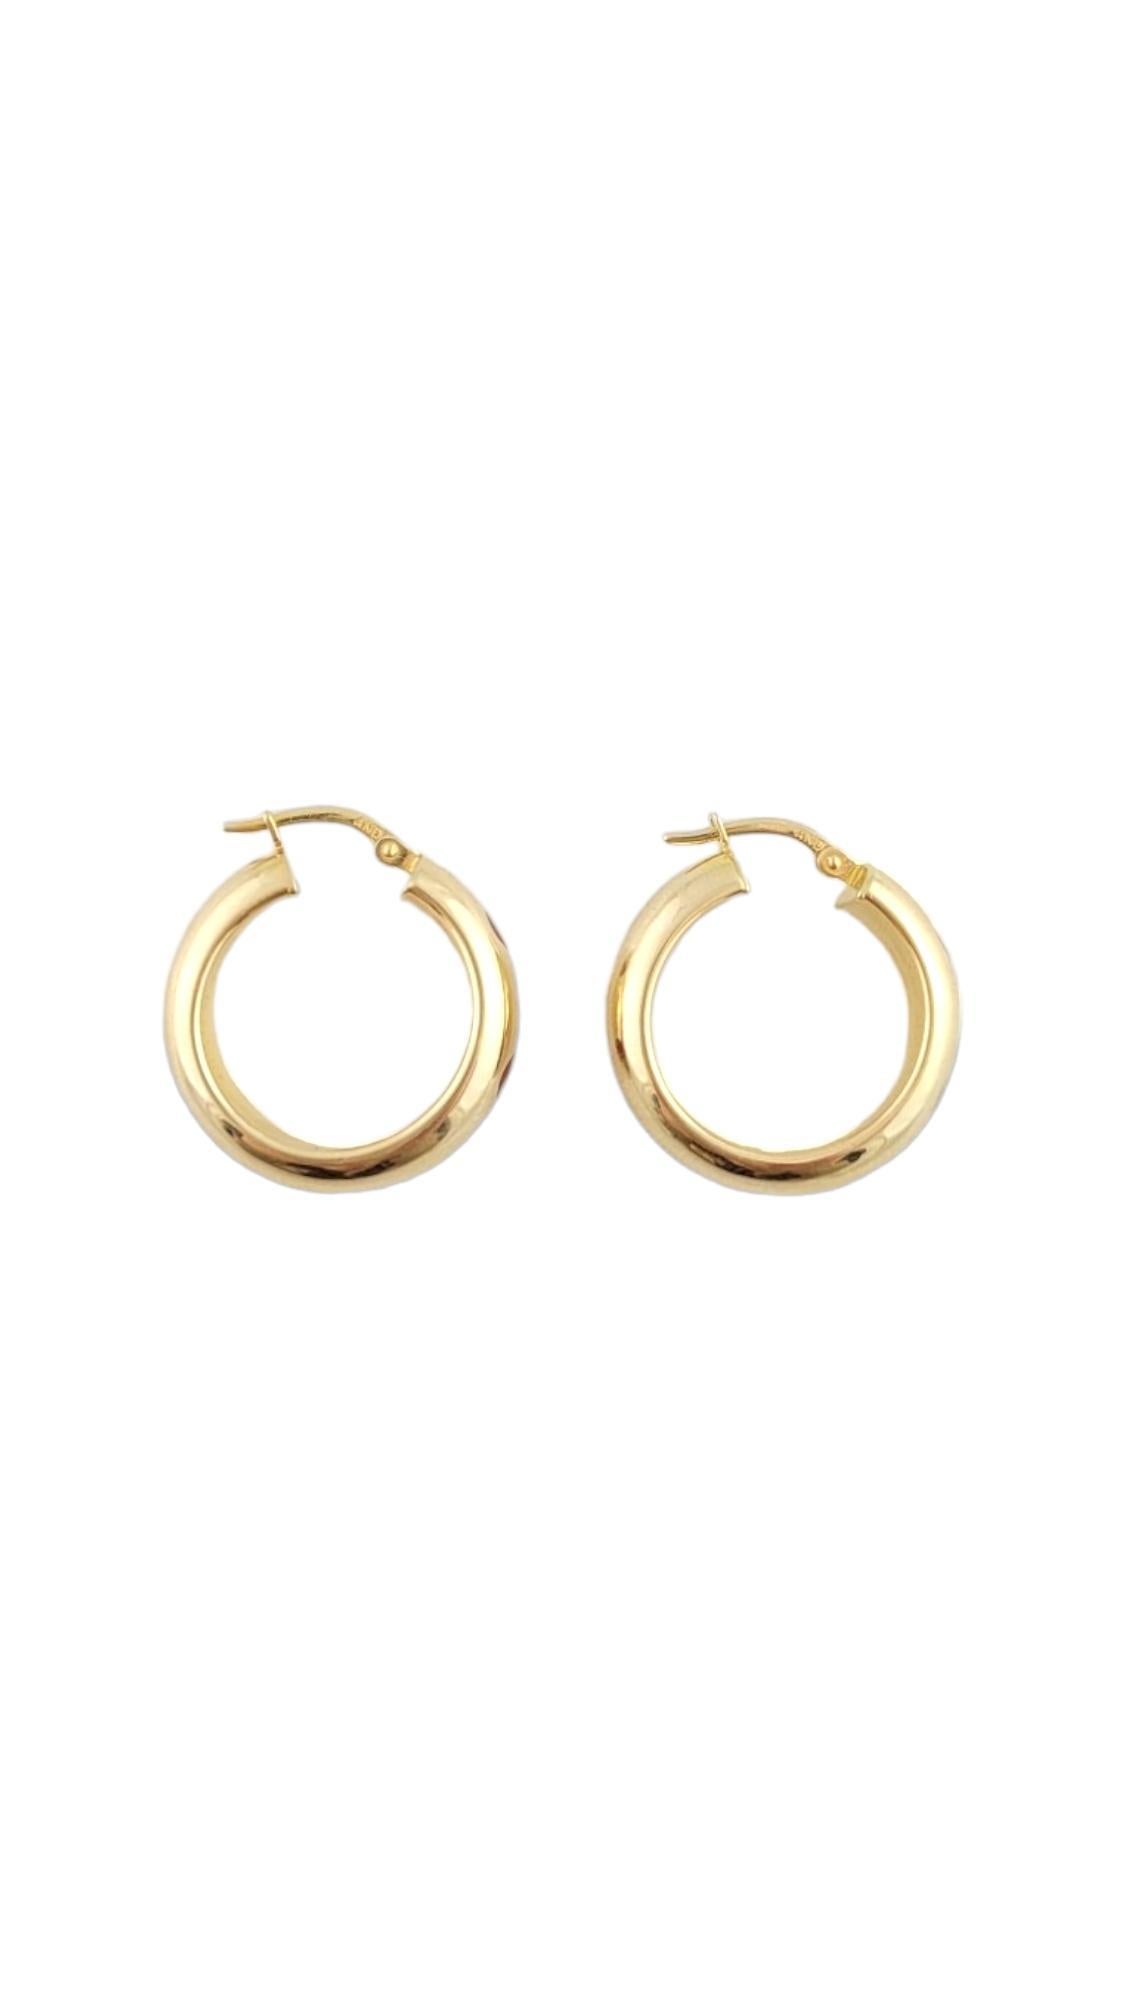 Vintage 14K Yellow Gold Hoop Earrings

Hoop earrings in 14 karat yellow gold.

Weight: 4.4 g/2.8 dwt.

Hallmark: 14 KT ITALY AND

Size: 23.7 mm X 6.1 mm X 3.1 mm

Approximately 6.1 mm thick.

Very good condition, professionally polished.

Will come